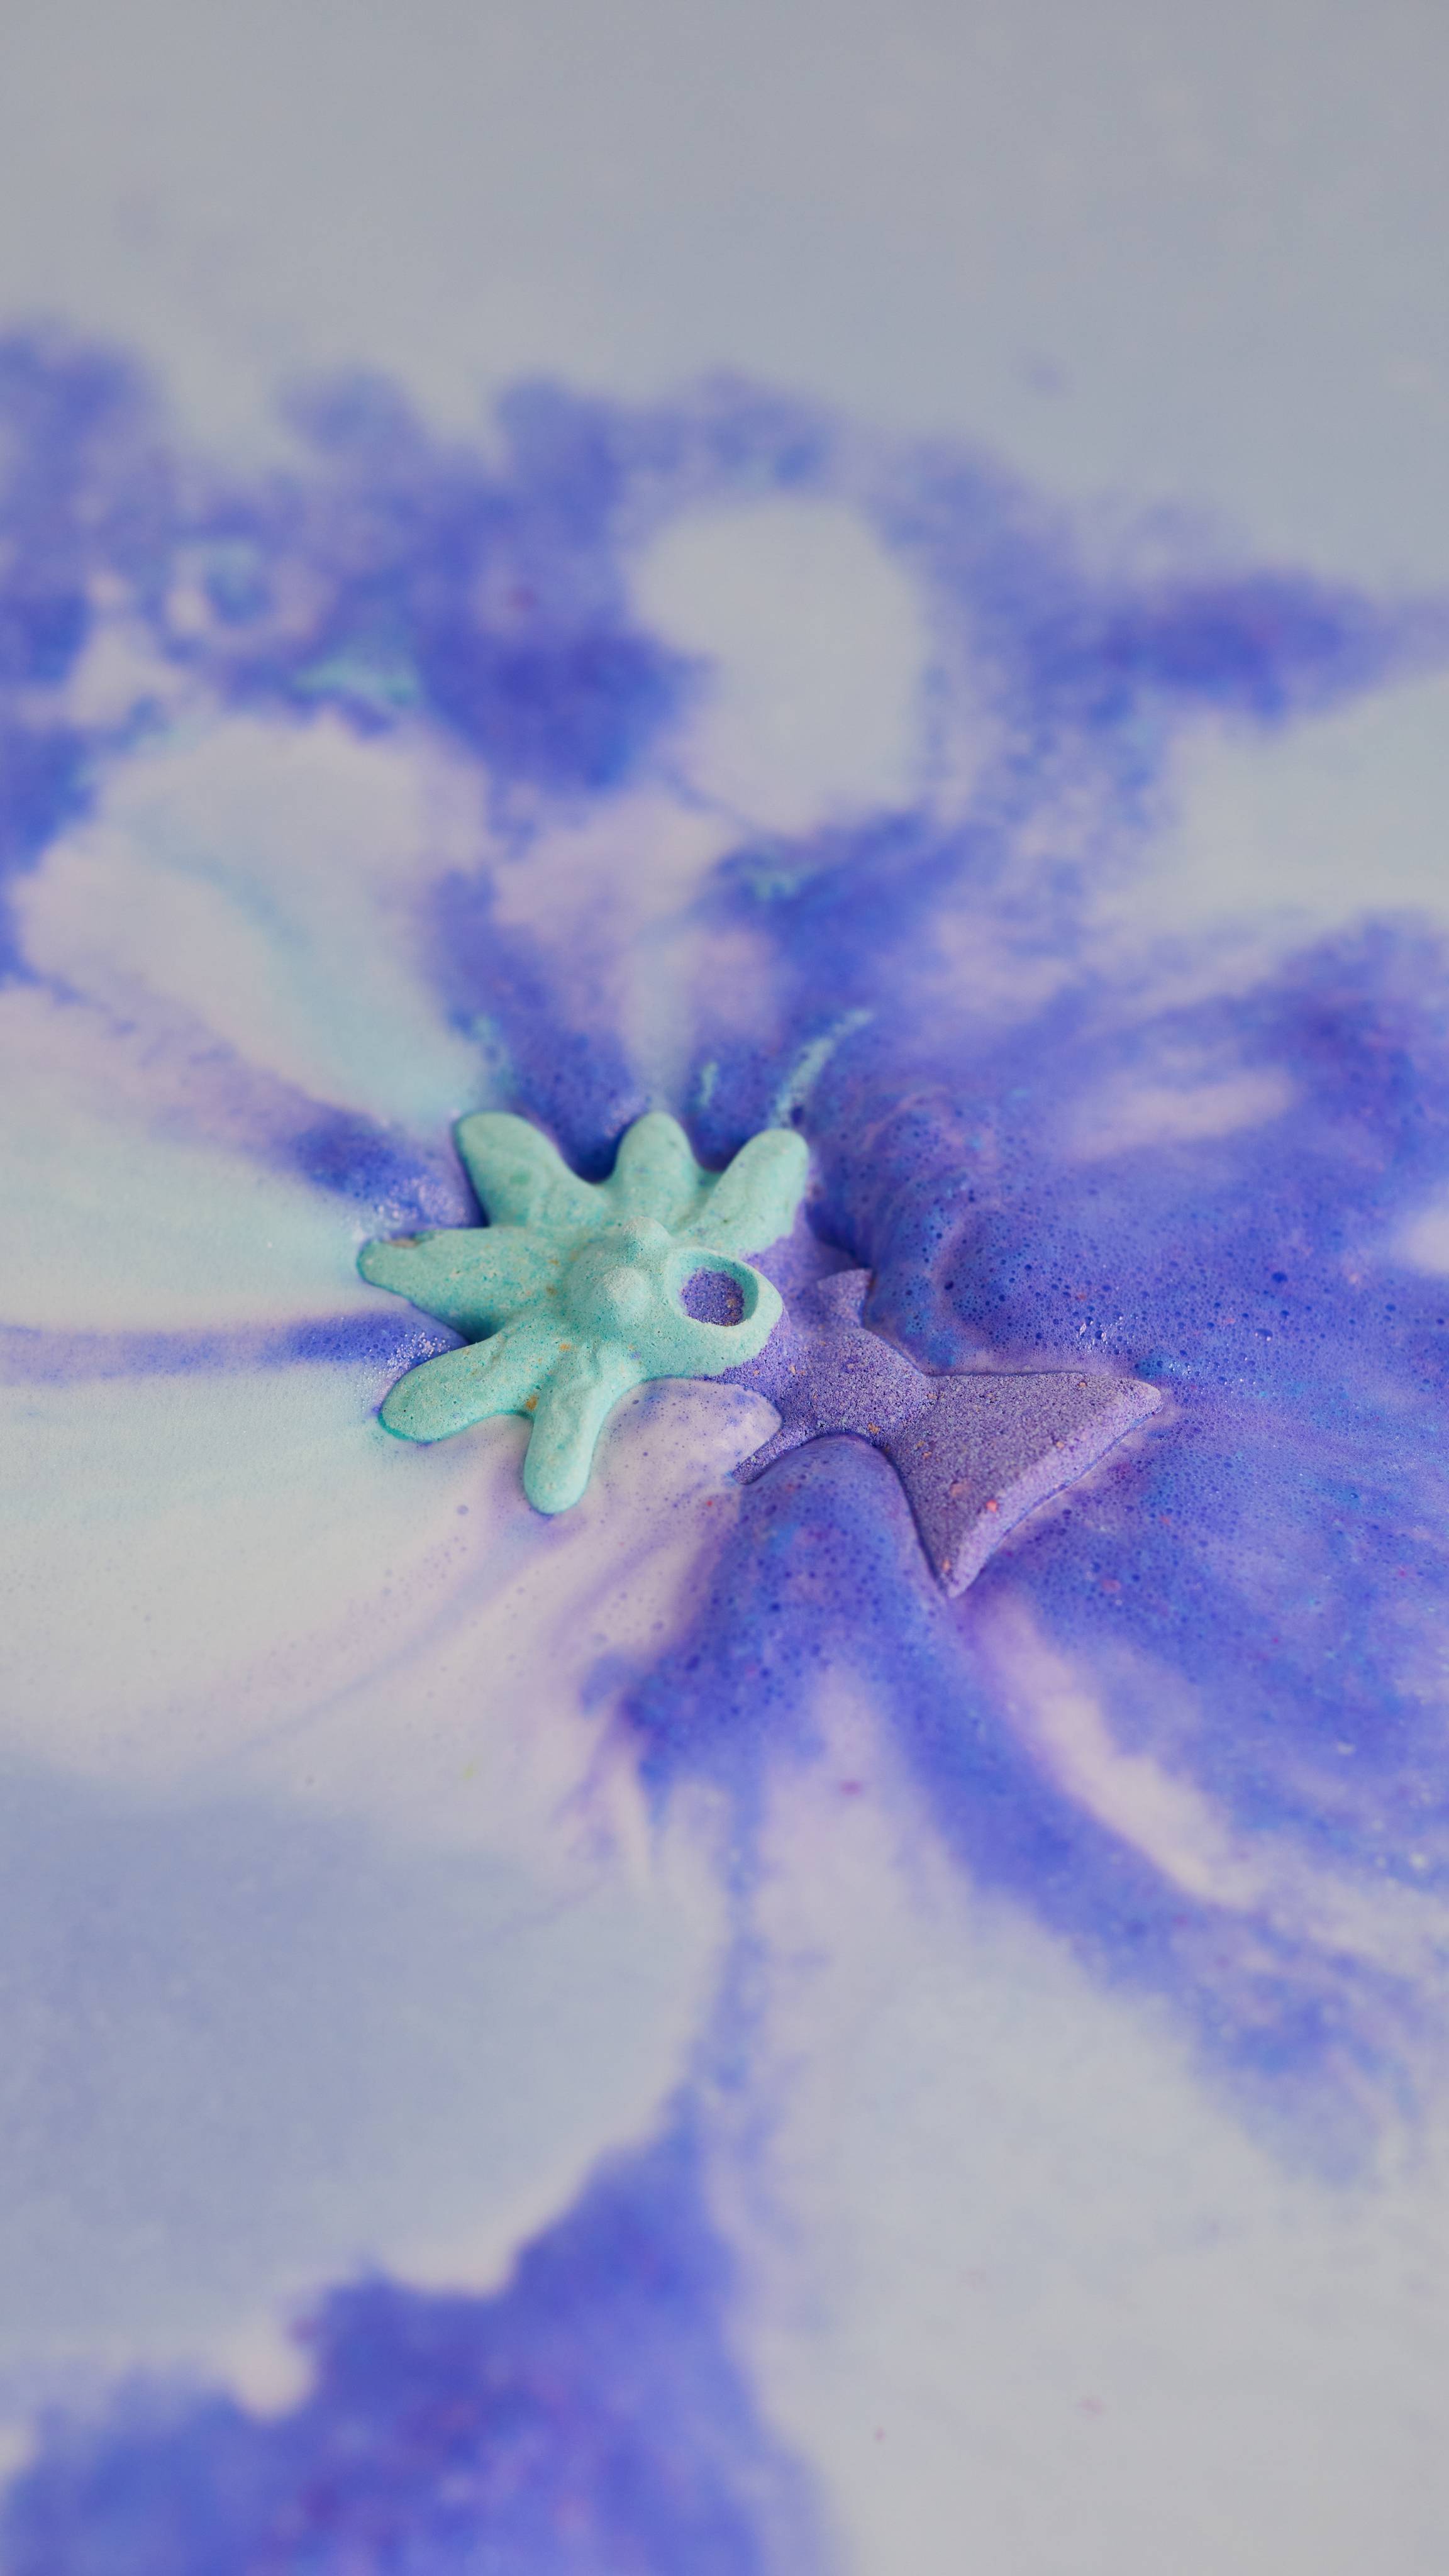 Bath bomb floats on the water, releasing foaming swirls of mystical blue and purple. 